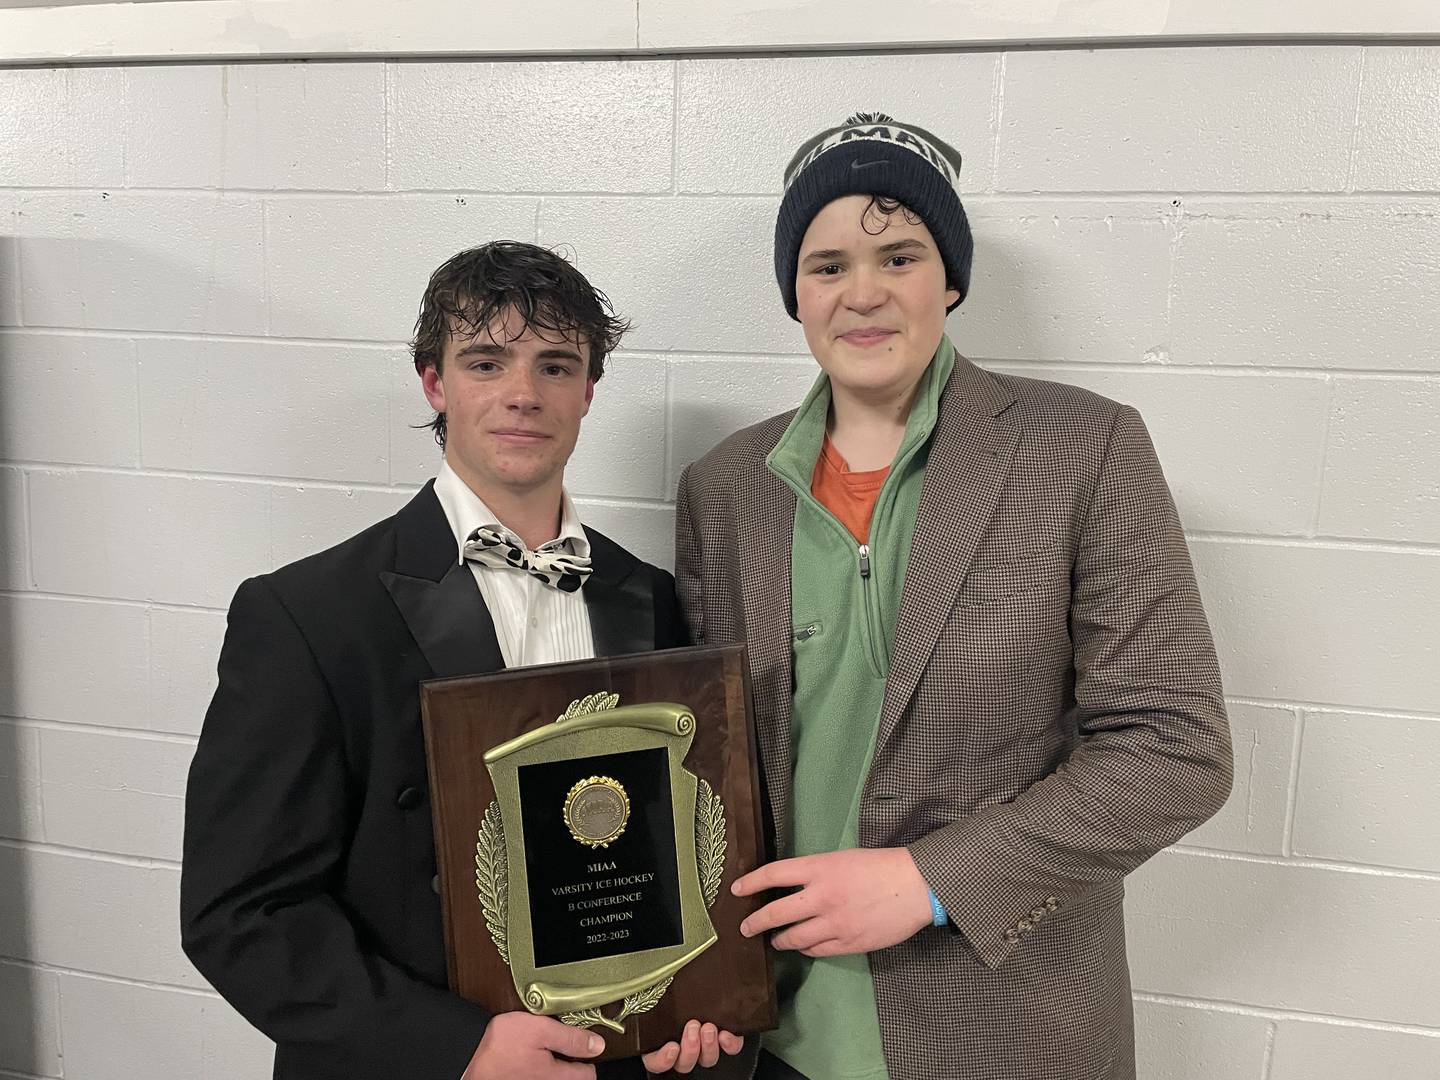 Behind the efforts of Oscar Woloson (left) and Simeon Schlagger, Gilman claimed the MIAA B Conference hockey championship Thursday. The Greyhounds defeated St. Paul's, 6-4, at The Gardens Ice House in Laurel.